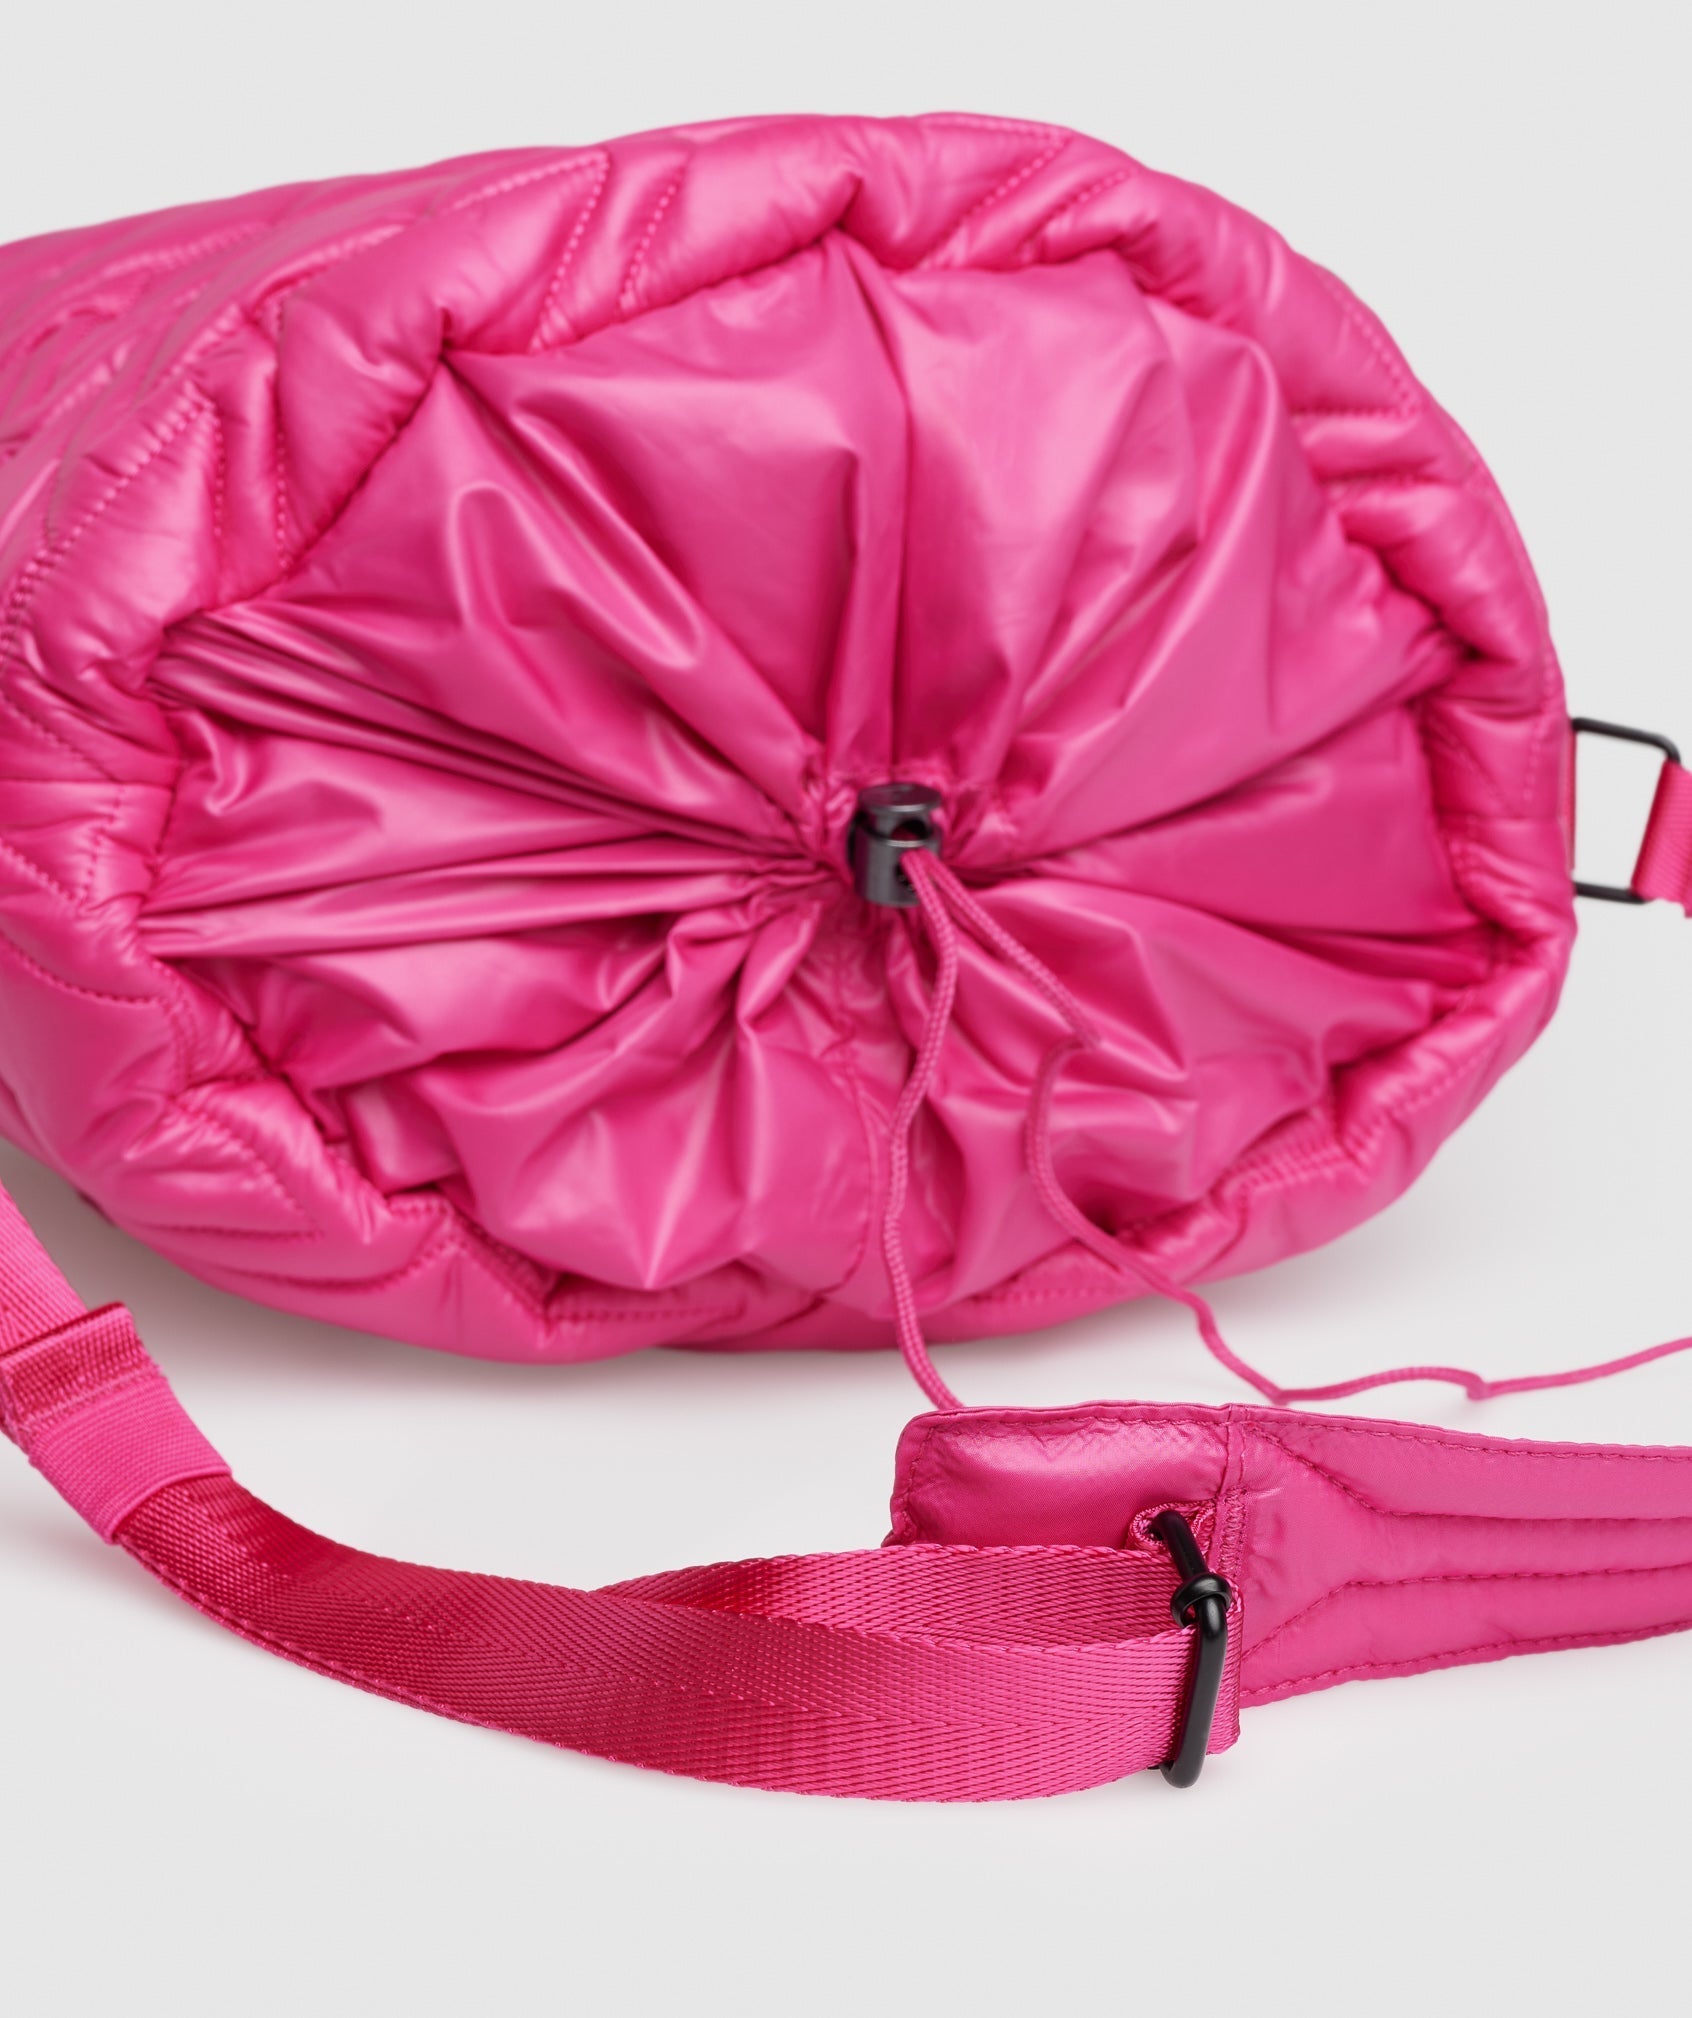 Quilted Yoga Tote in Bold Magenta - view 3